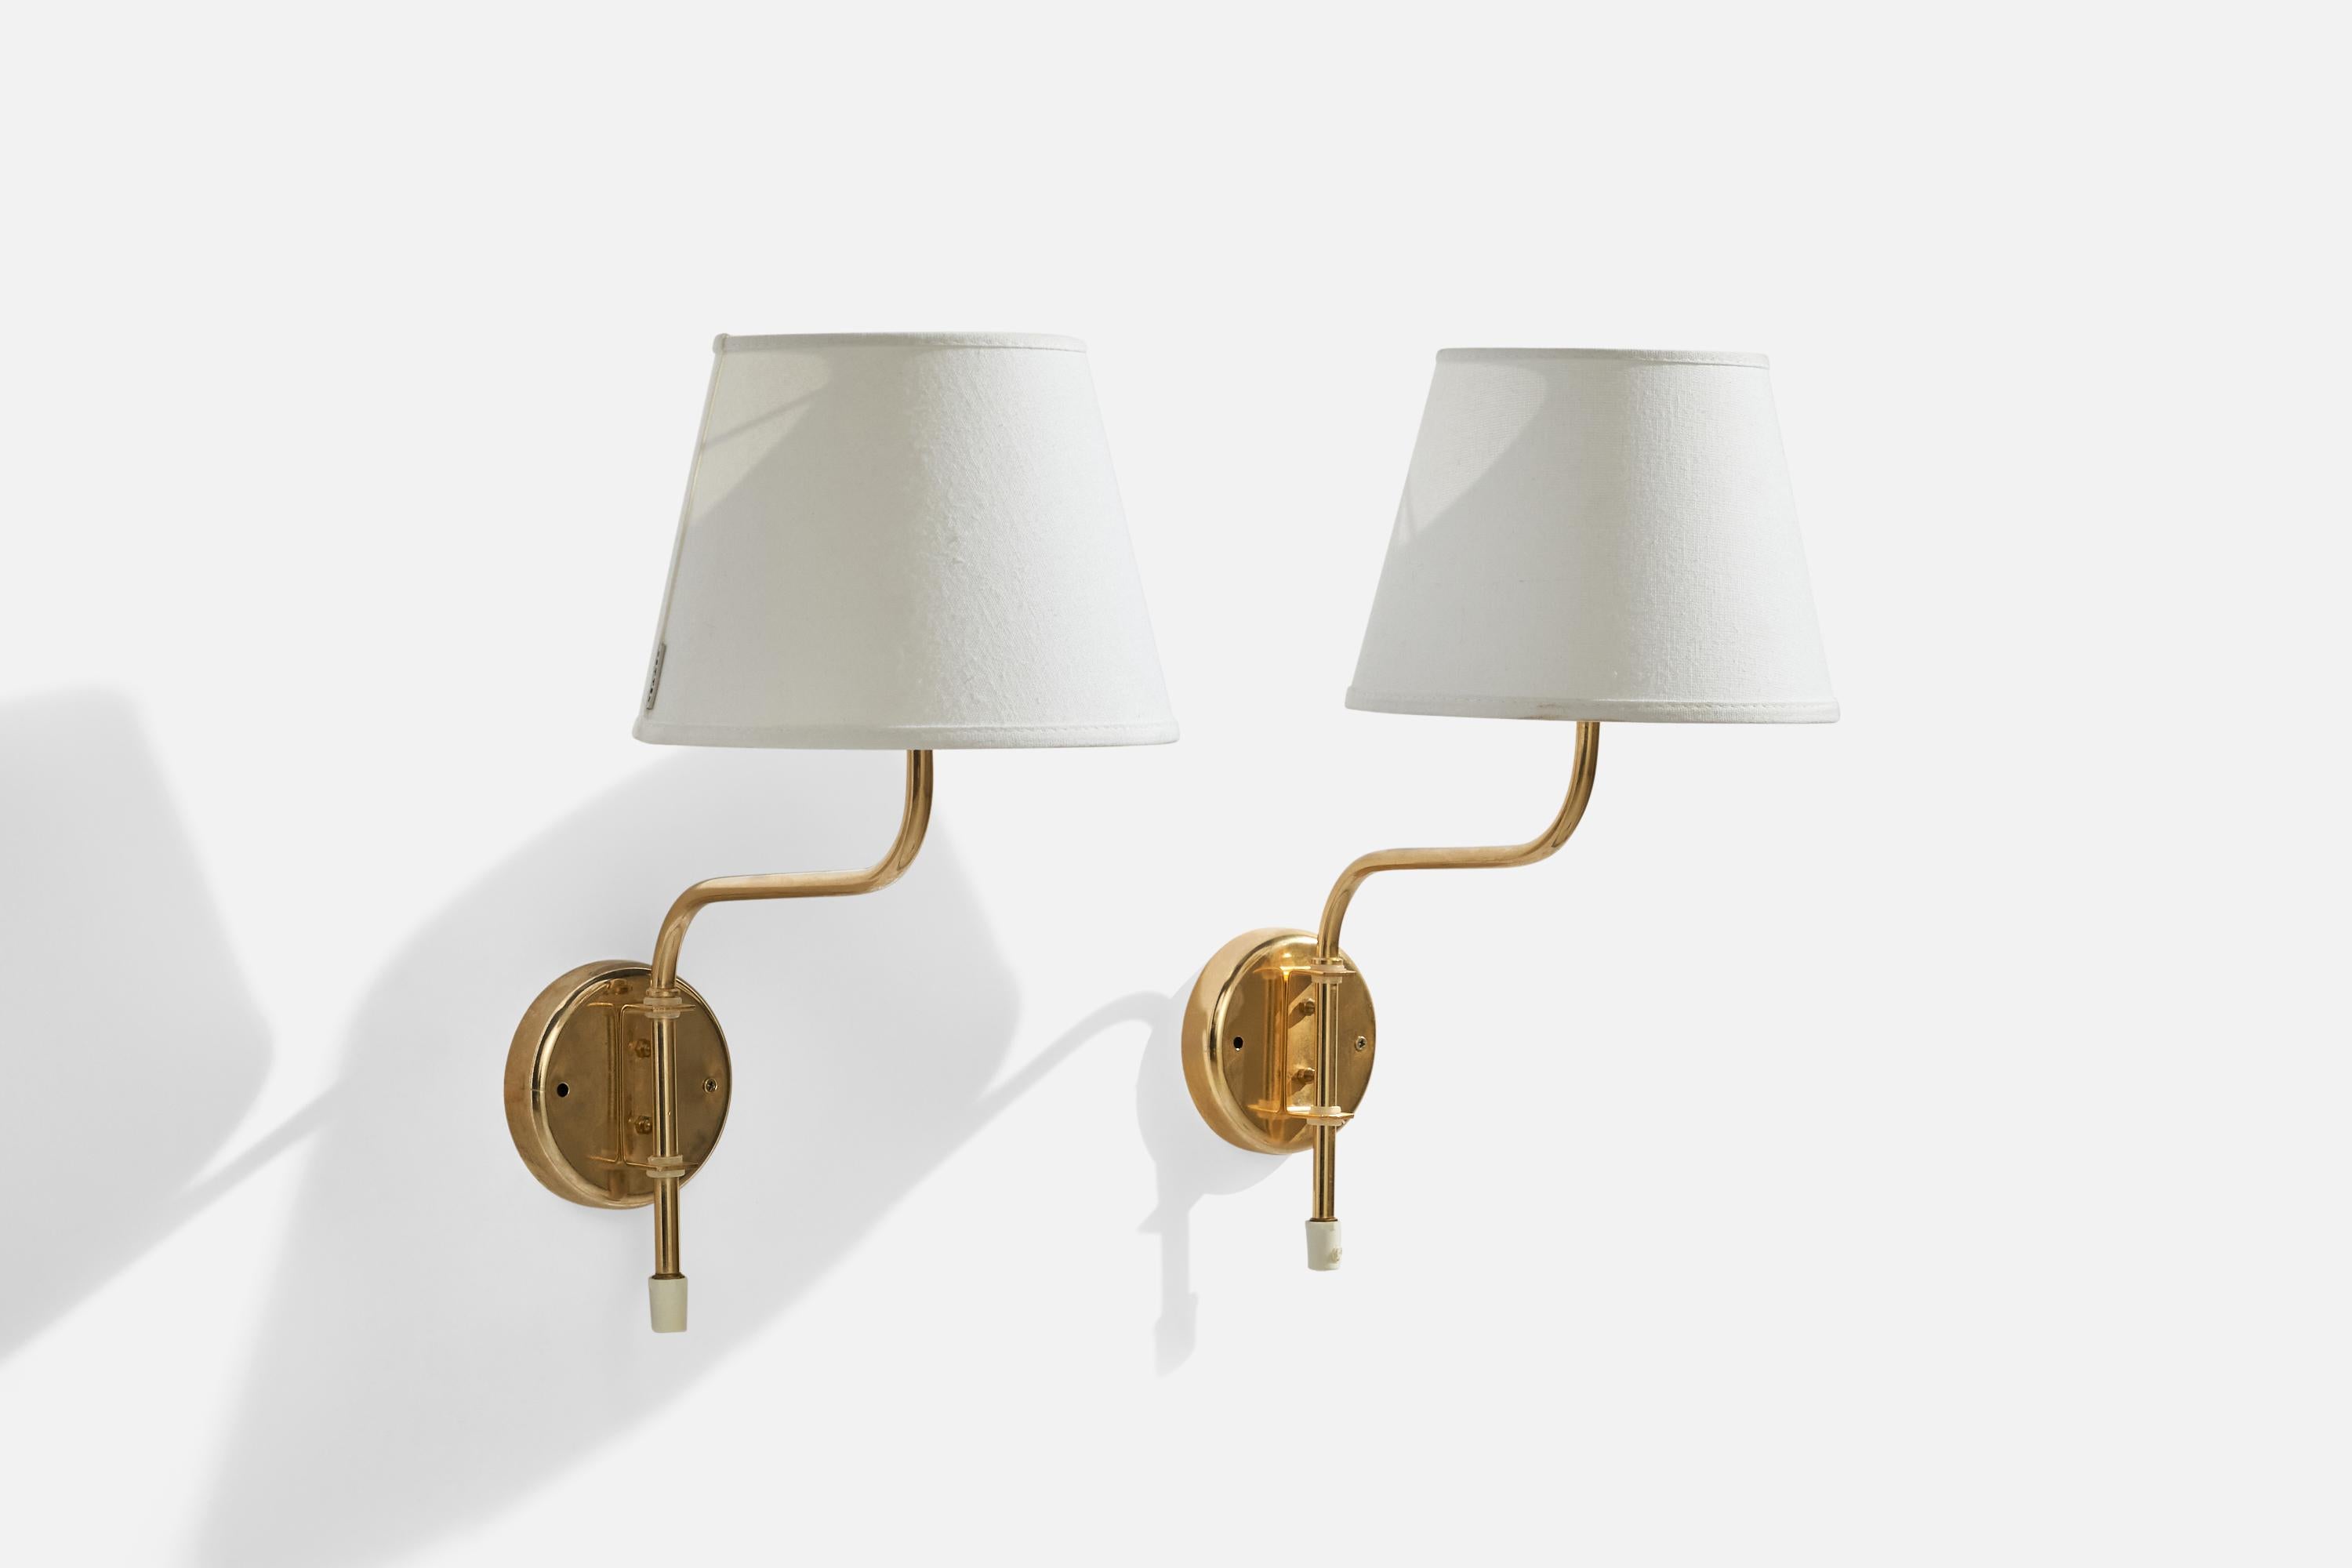 
A pair of adjustable brass and white fabric wall lights designed and produced by AB Belid, Sweden, 1970s.

Overall Dimensions (inches): 16”  H x 8” W x 11” D
Back Plate Dimensions (inches): 4” H x 4” W x .75” D
Bulb Specifications: E-26 Bulb
Number